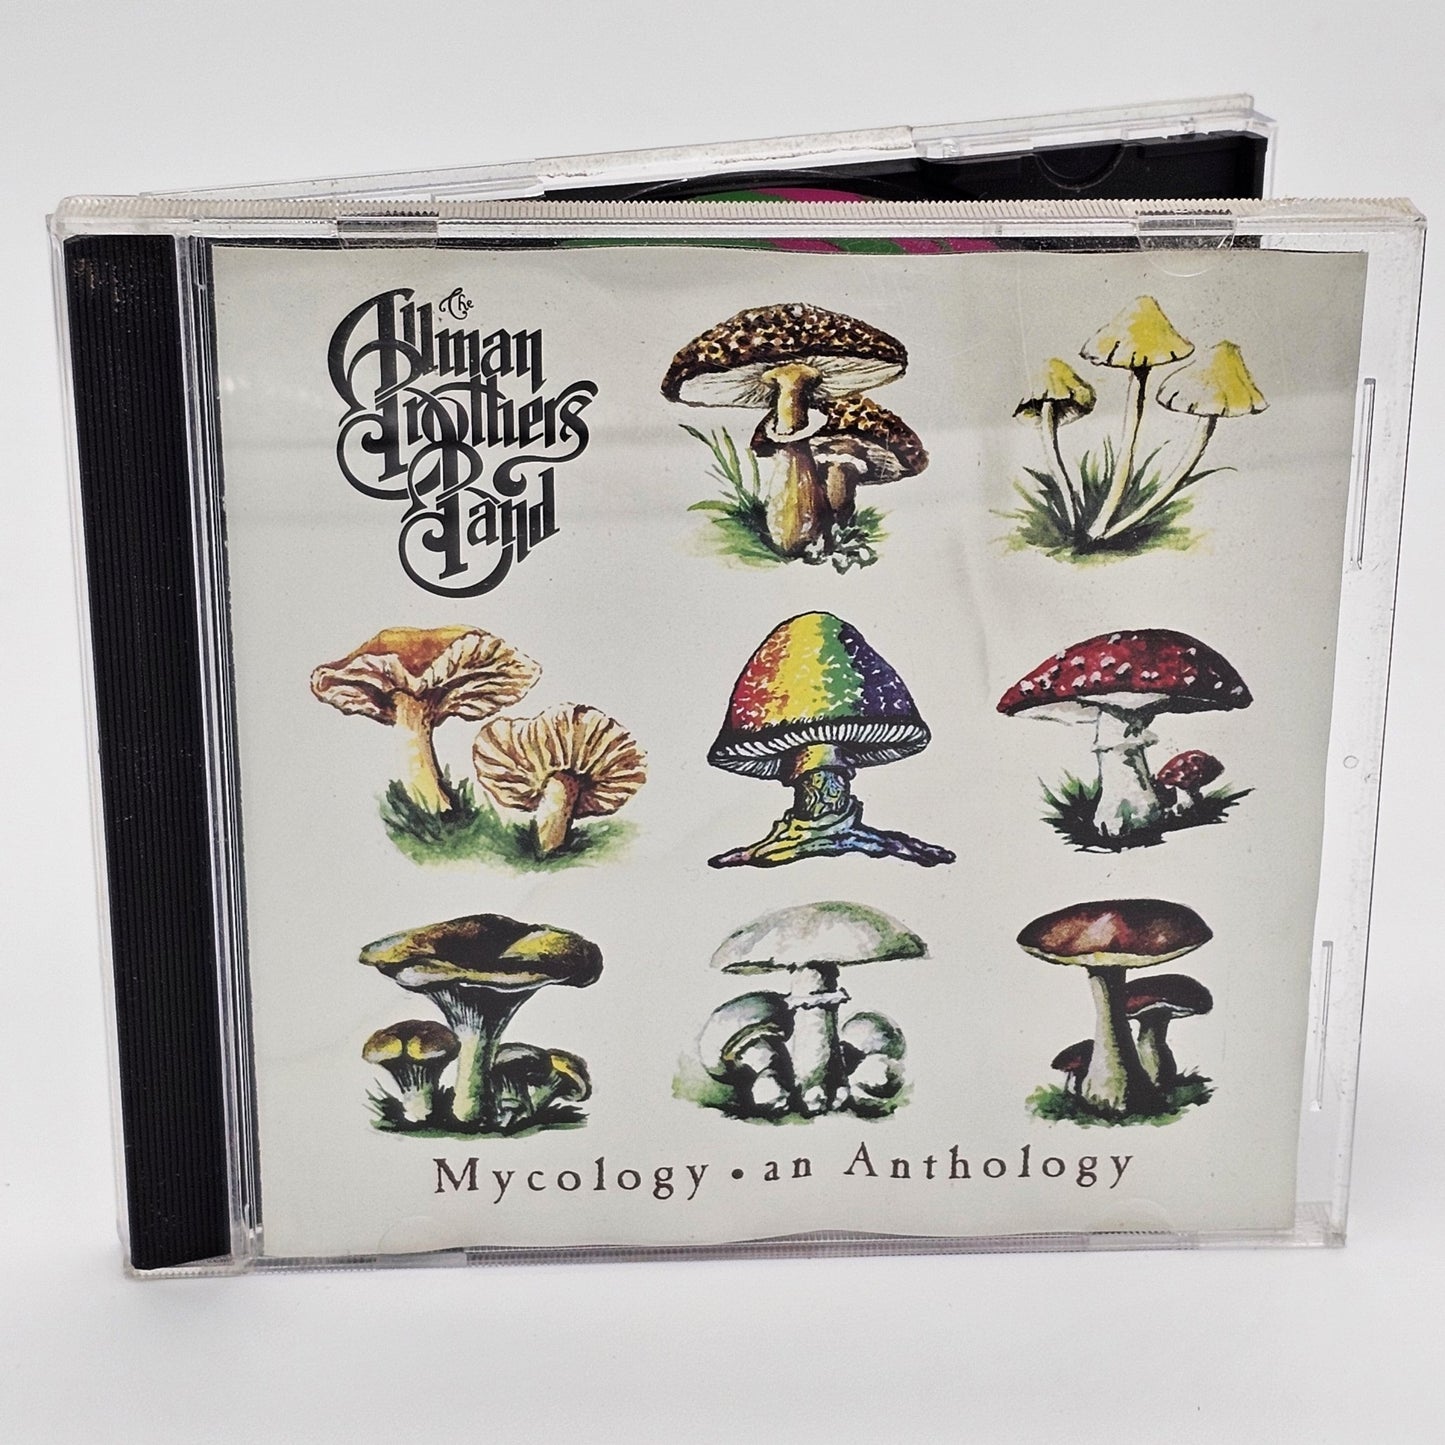 Sony Music - Allman Brothers Band | Mycology An Anthology - Compact Disc - Steady Bunny Shop